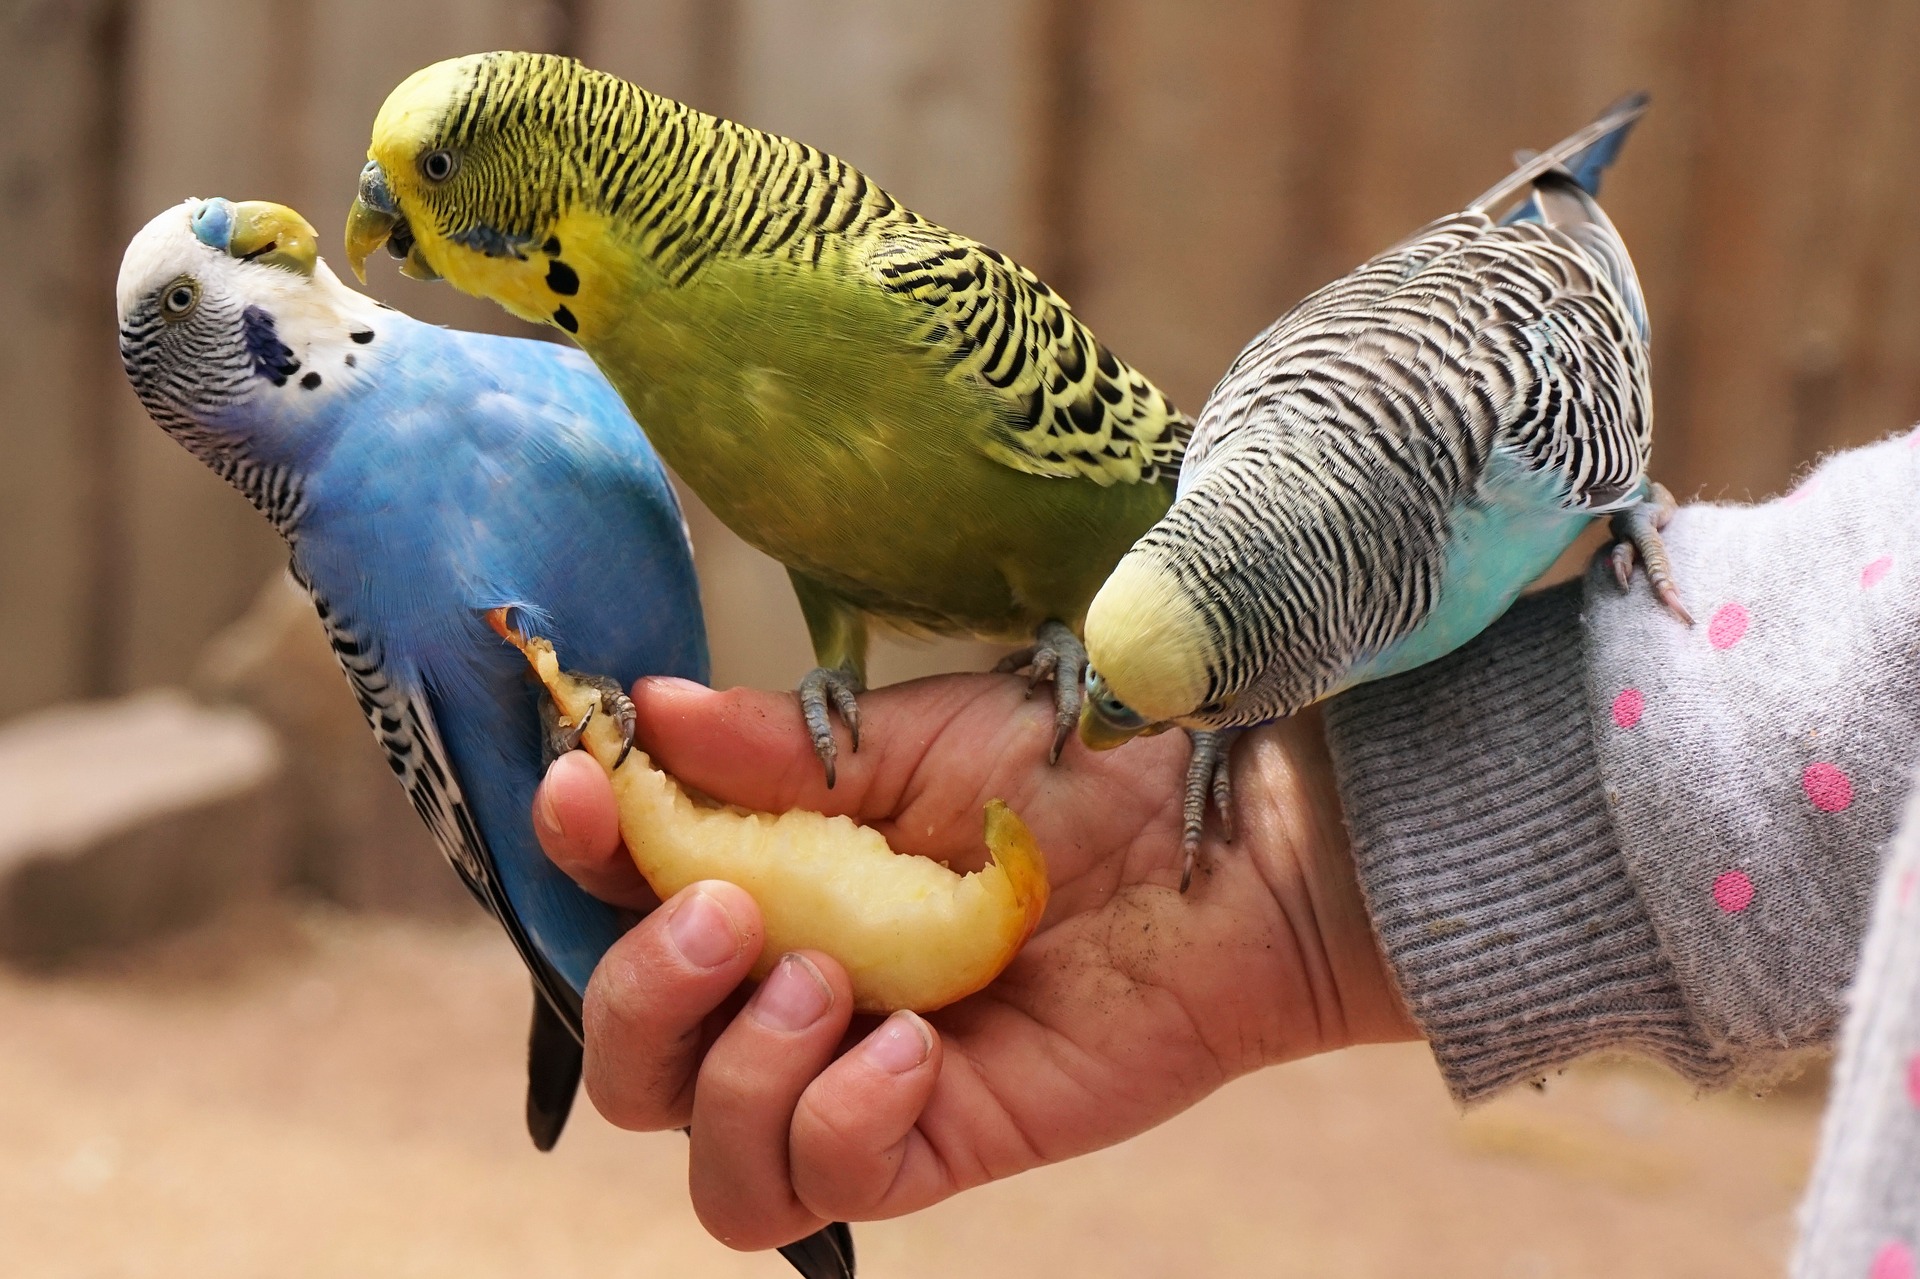 Caring for Your New Pet Parakeet